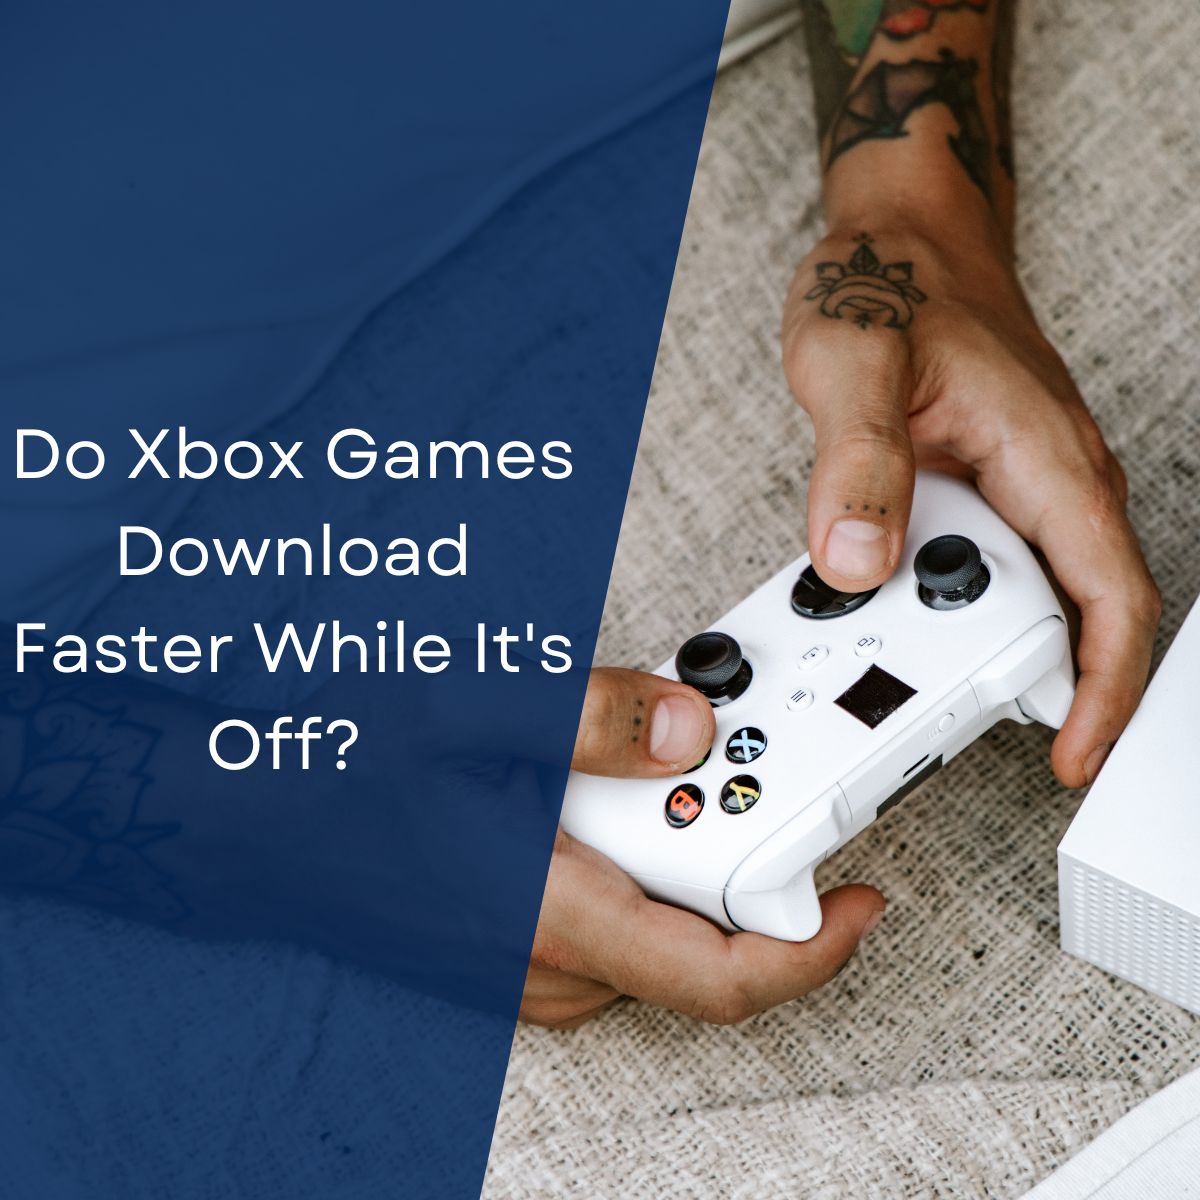 How to Make Games on Xbox One Download Faster?